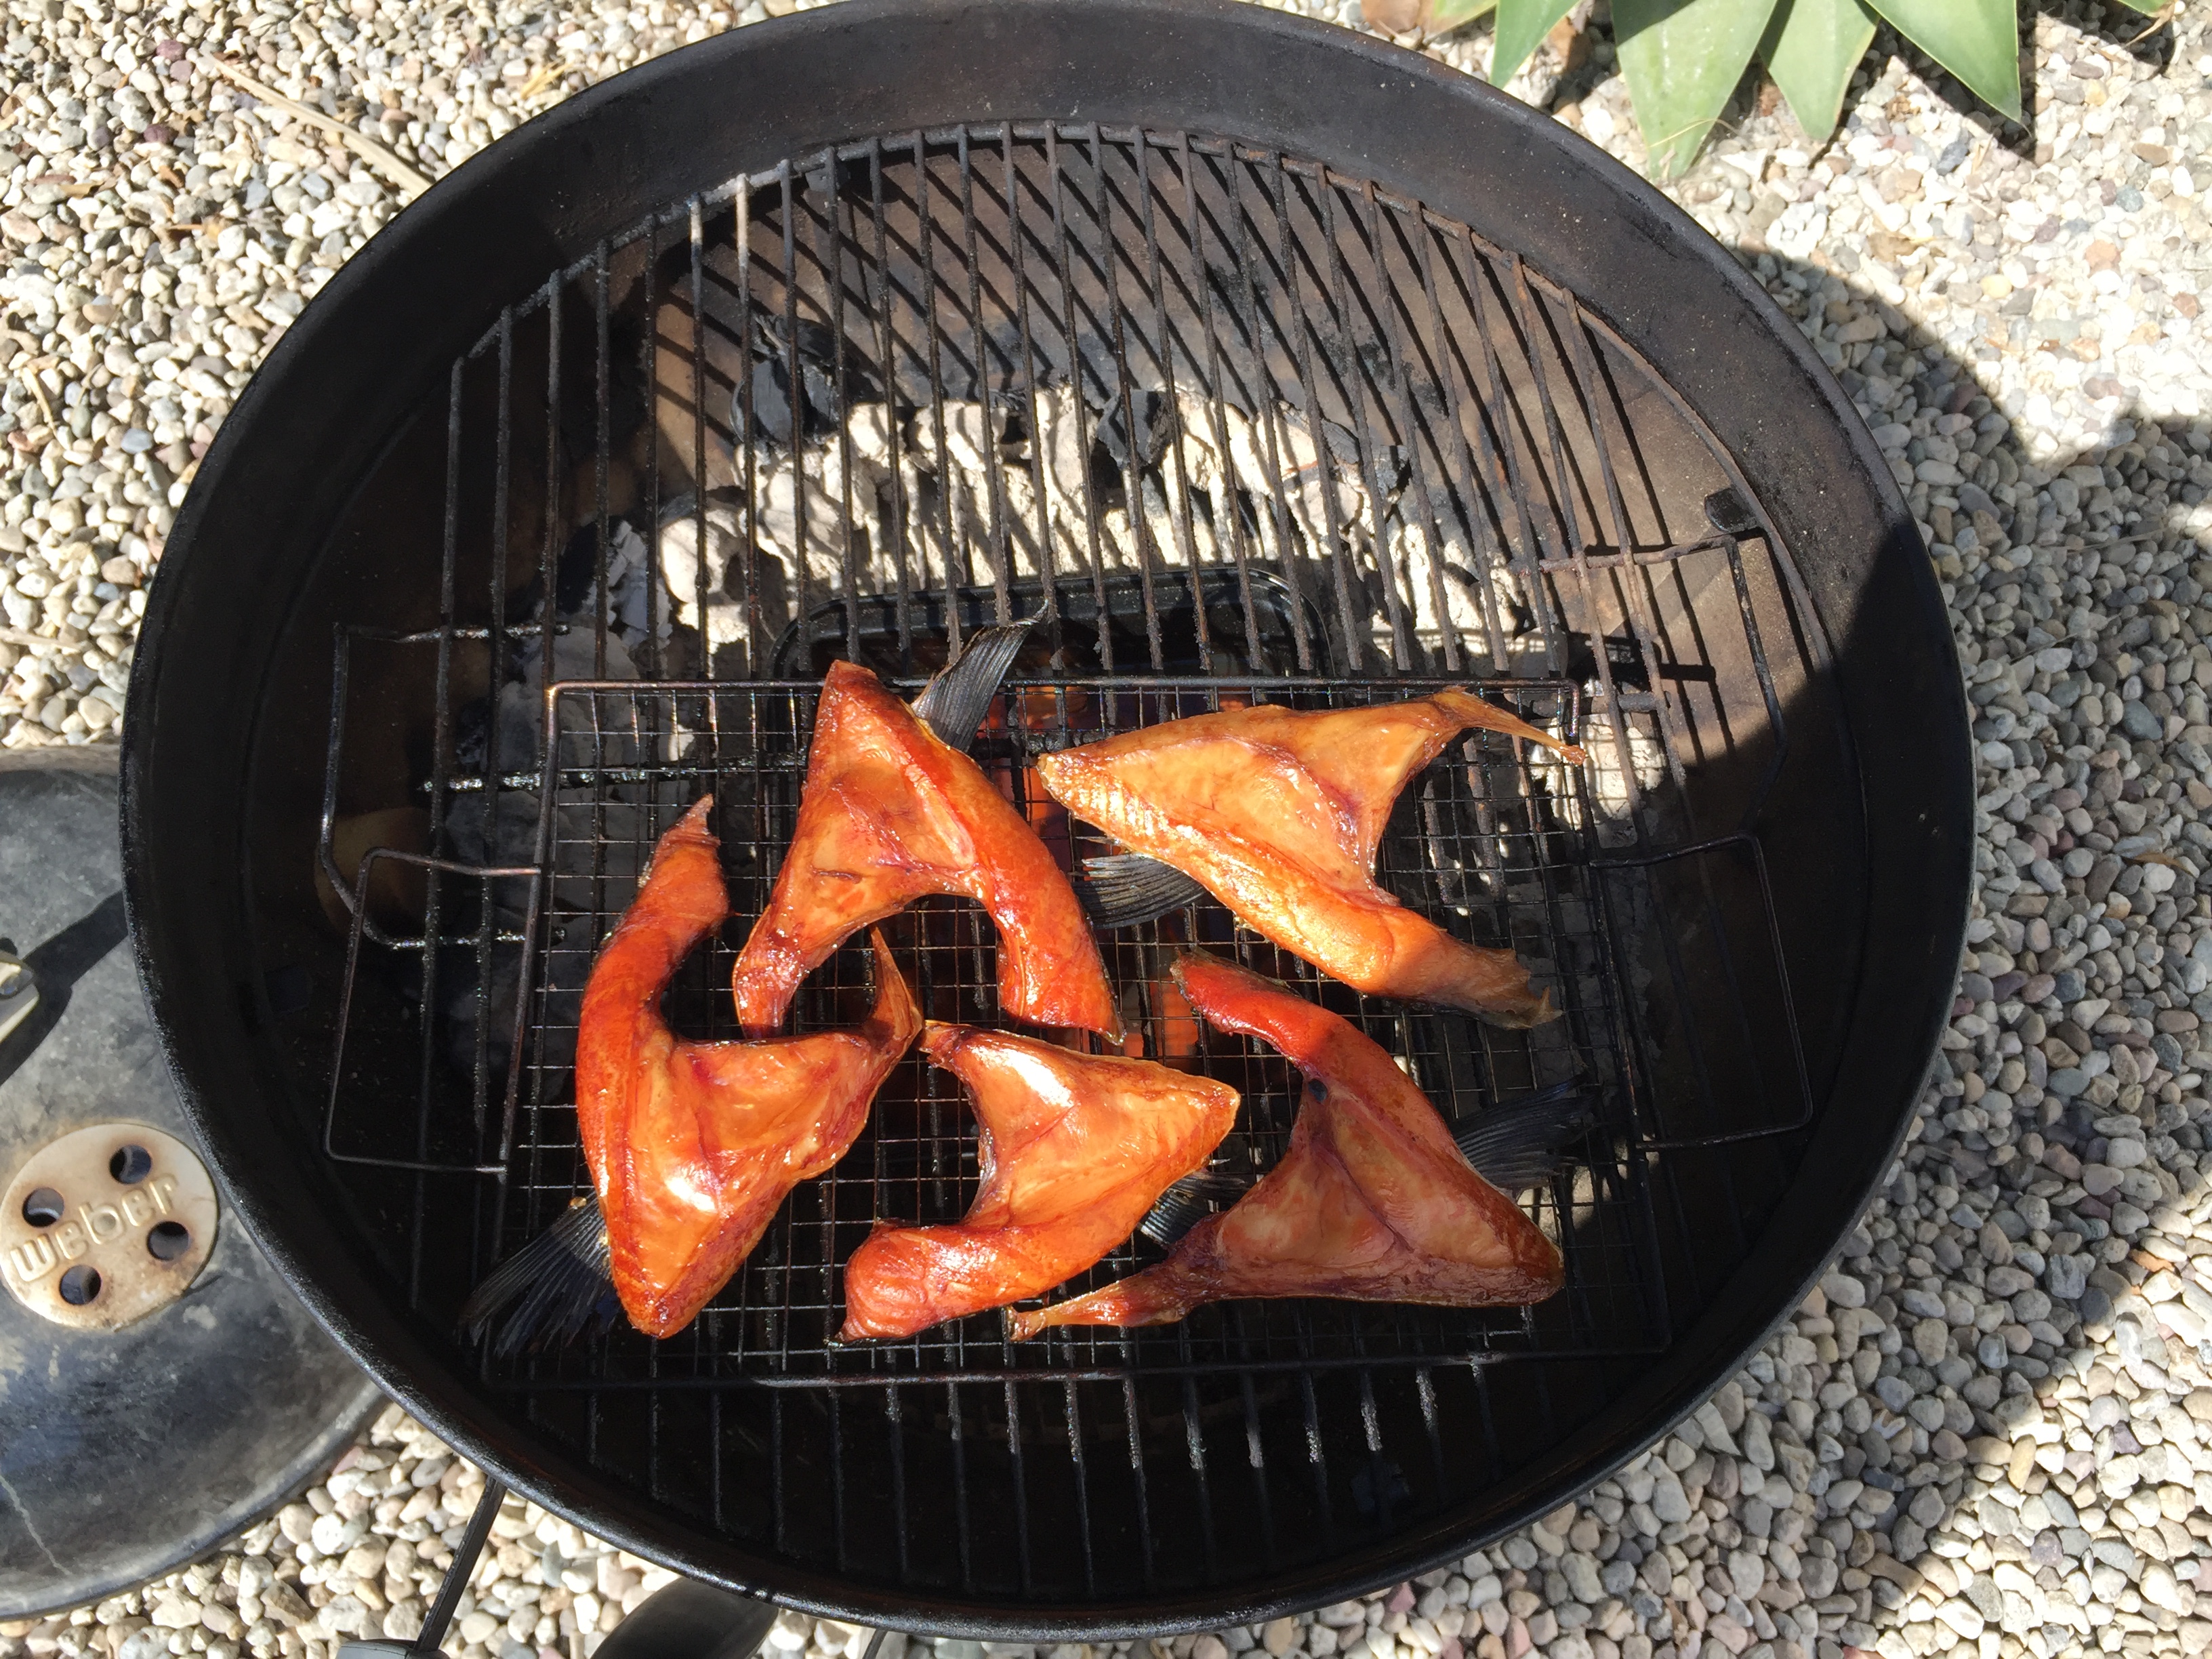 Salmon Collars on the grill 2018